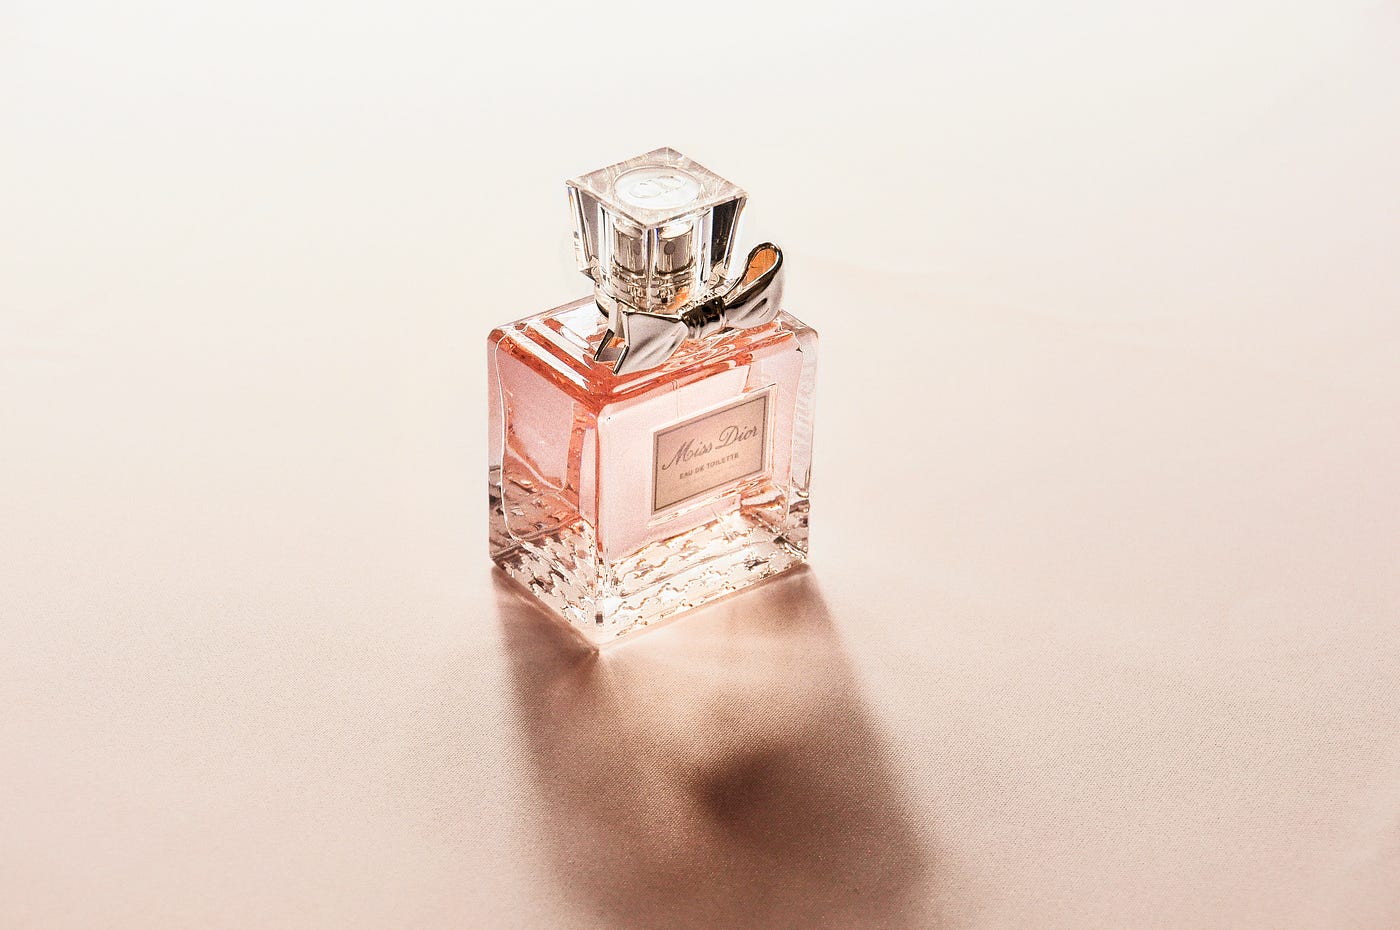 After Testing Hundreds of Perfumes, These Are the 20 Very Best